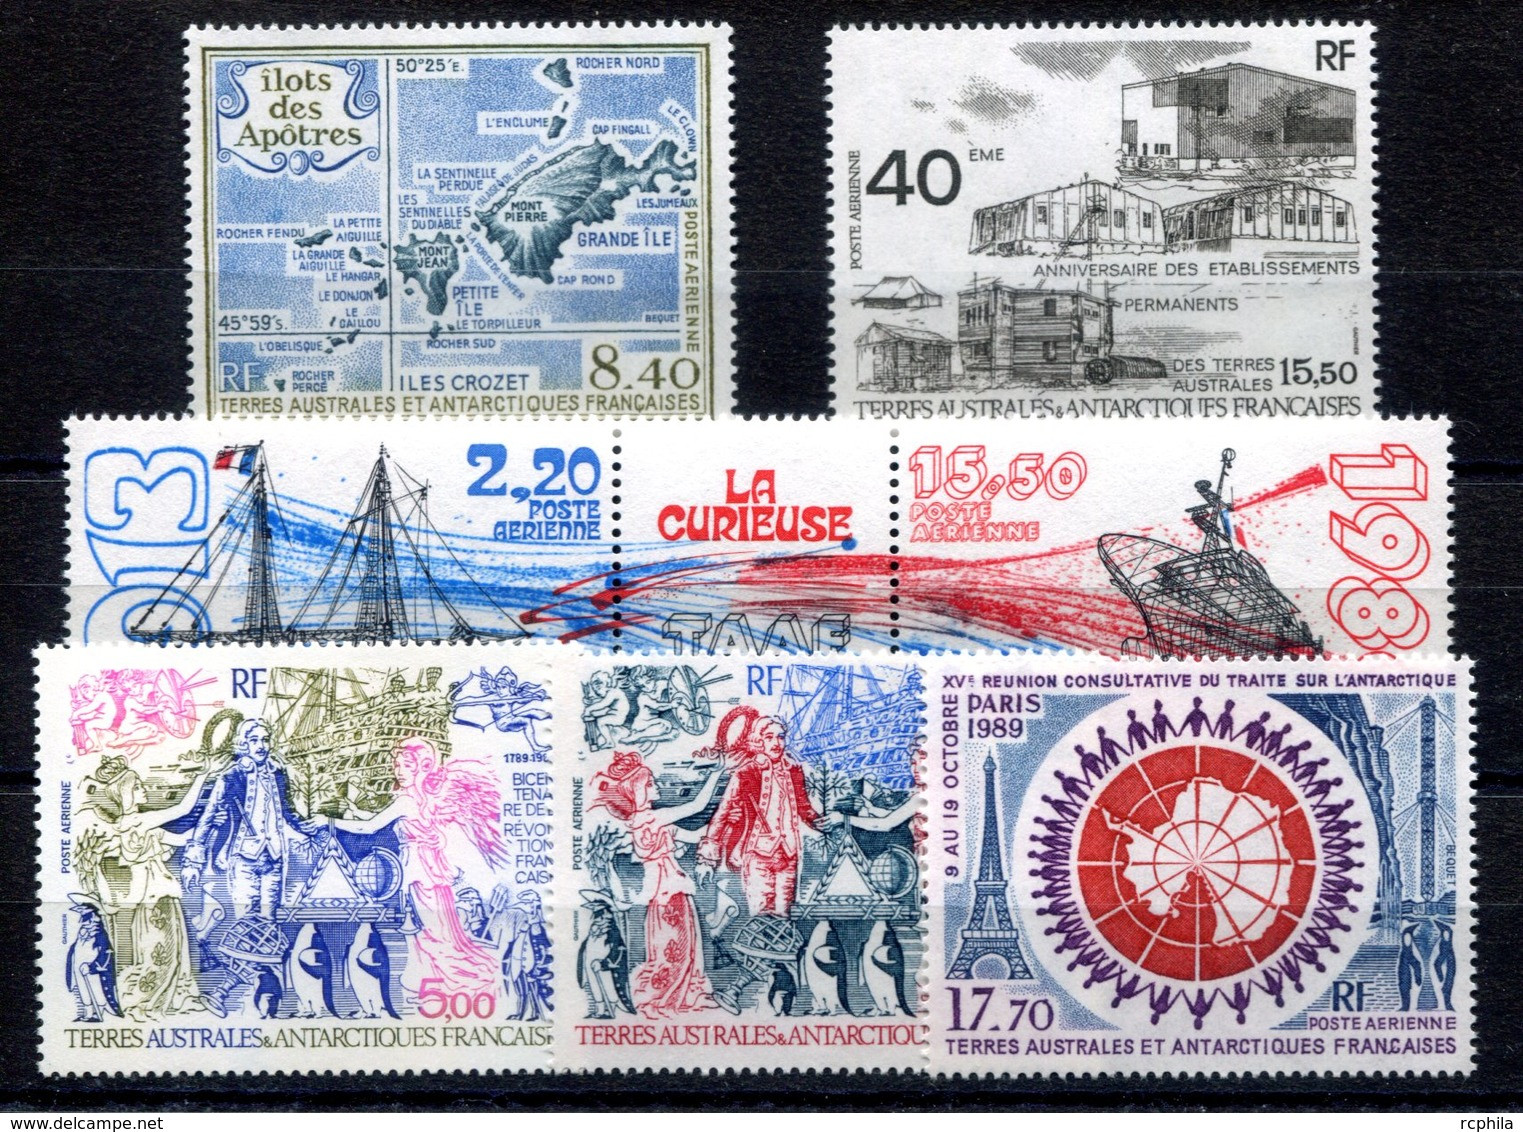 RC 17507 TAAF COTE 36,10€ - 1989 ANNEE COMPLETE SOIT 7 TIMBRES POSTE AERIENNE N° 103 / 109 NEUF ** MNH TB - Luftpost